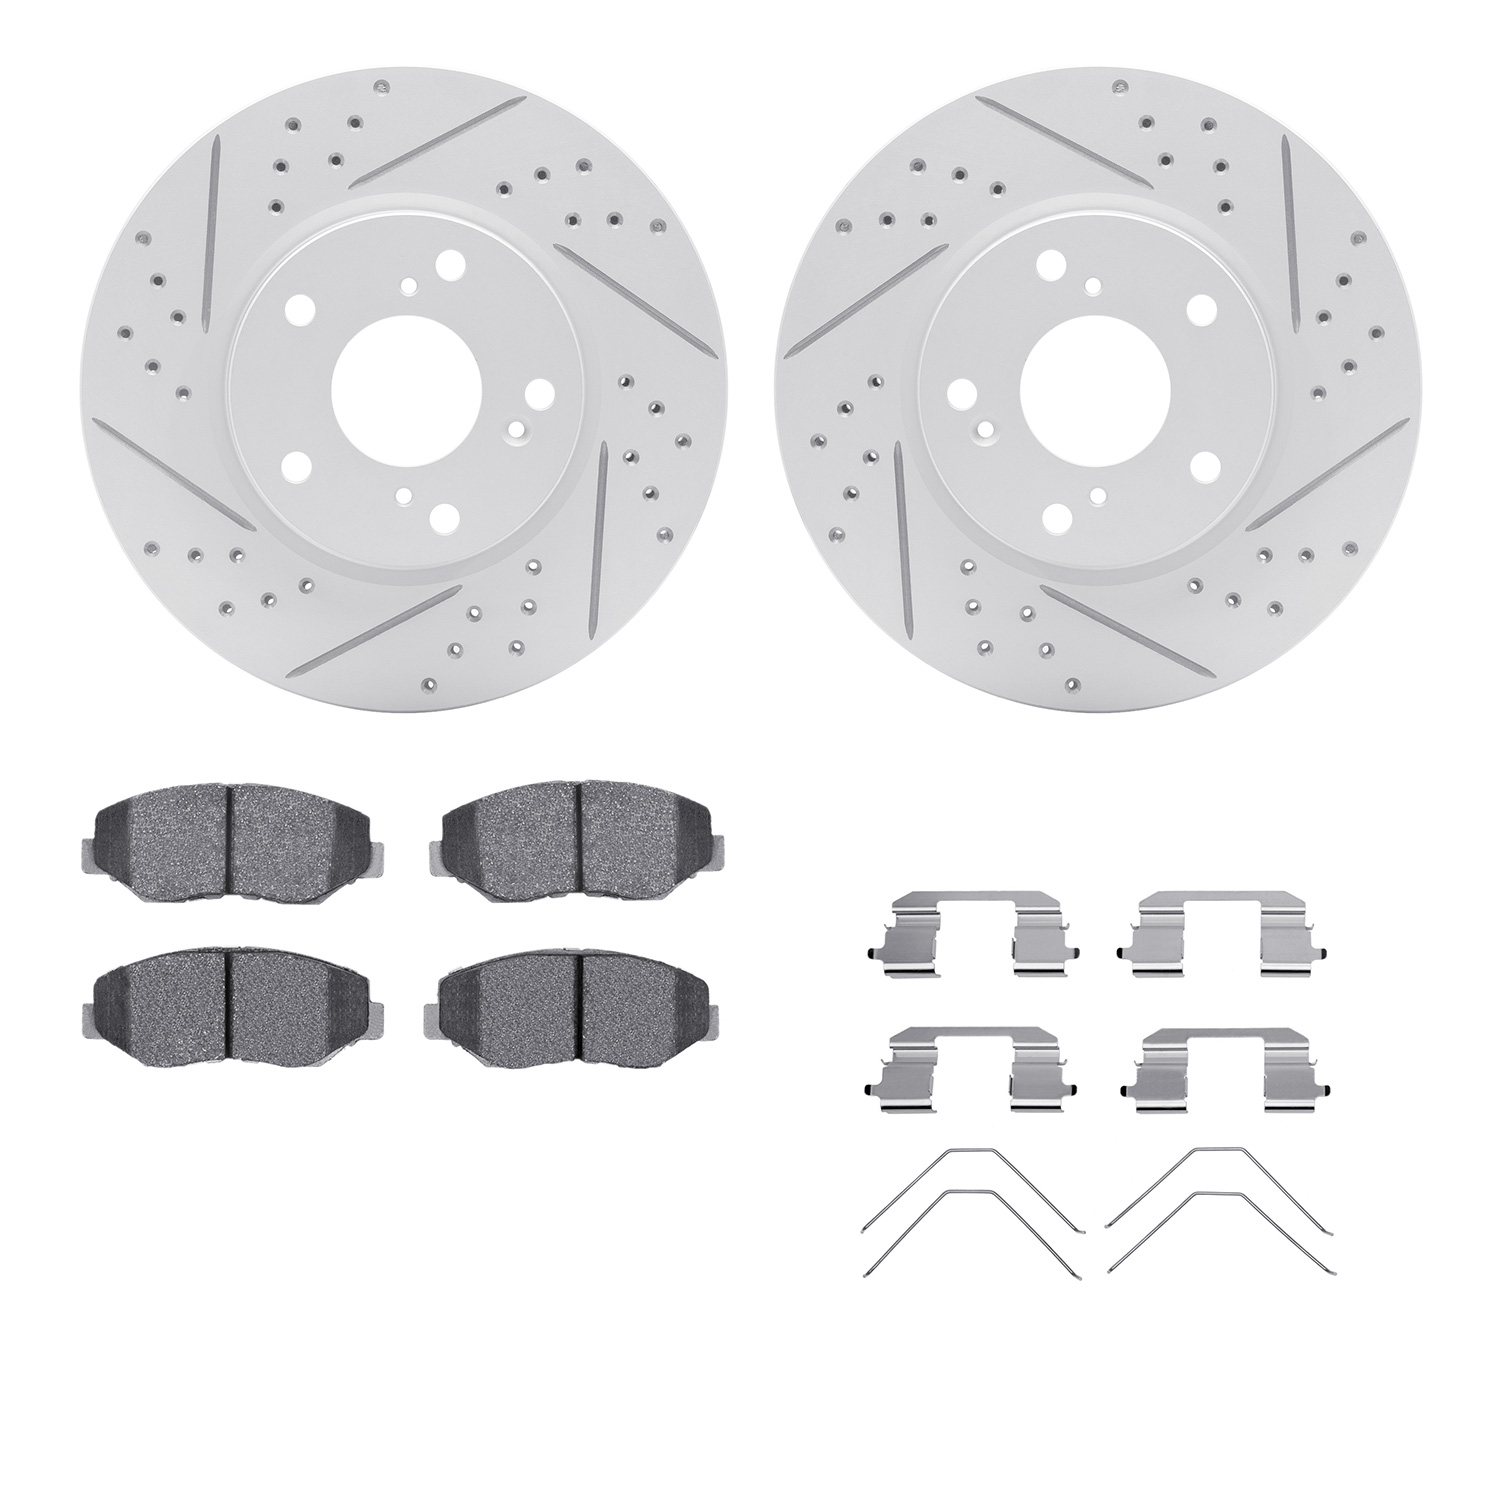 2512-59089 Geoperformance Drilled/Slotted Rotors w/5000 Advanced Brake Pads Kit & Hardware, 2016-2021 Acura/Honda, Position: Fro